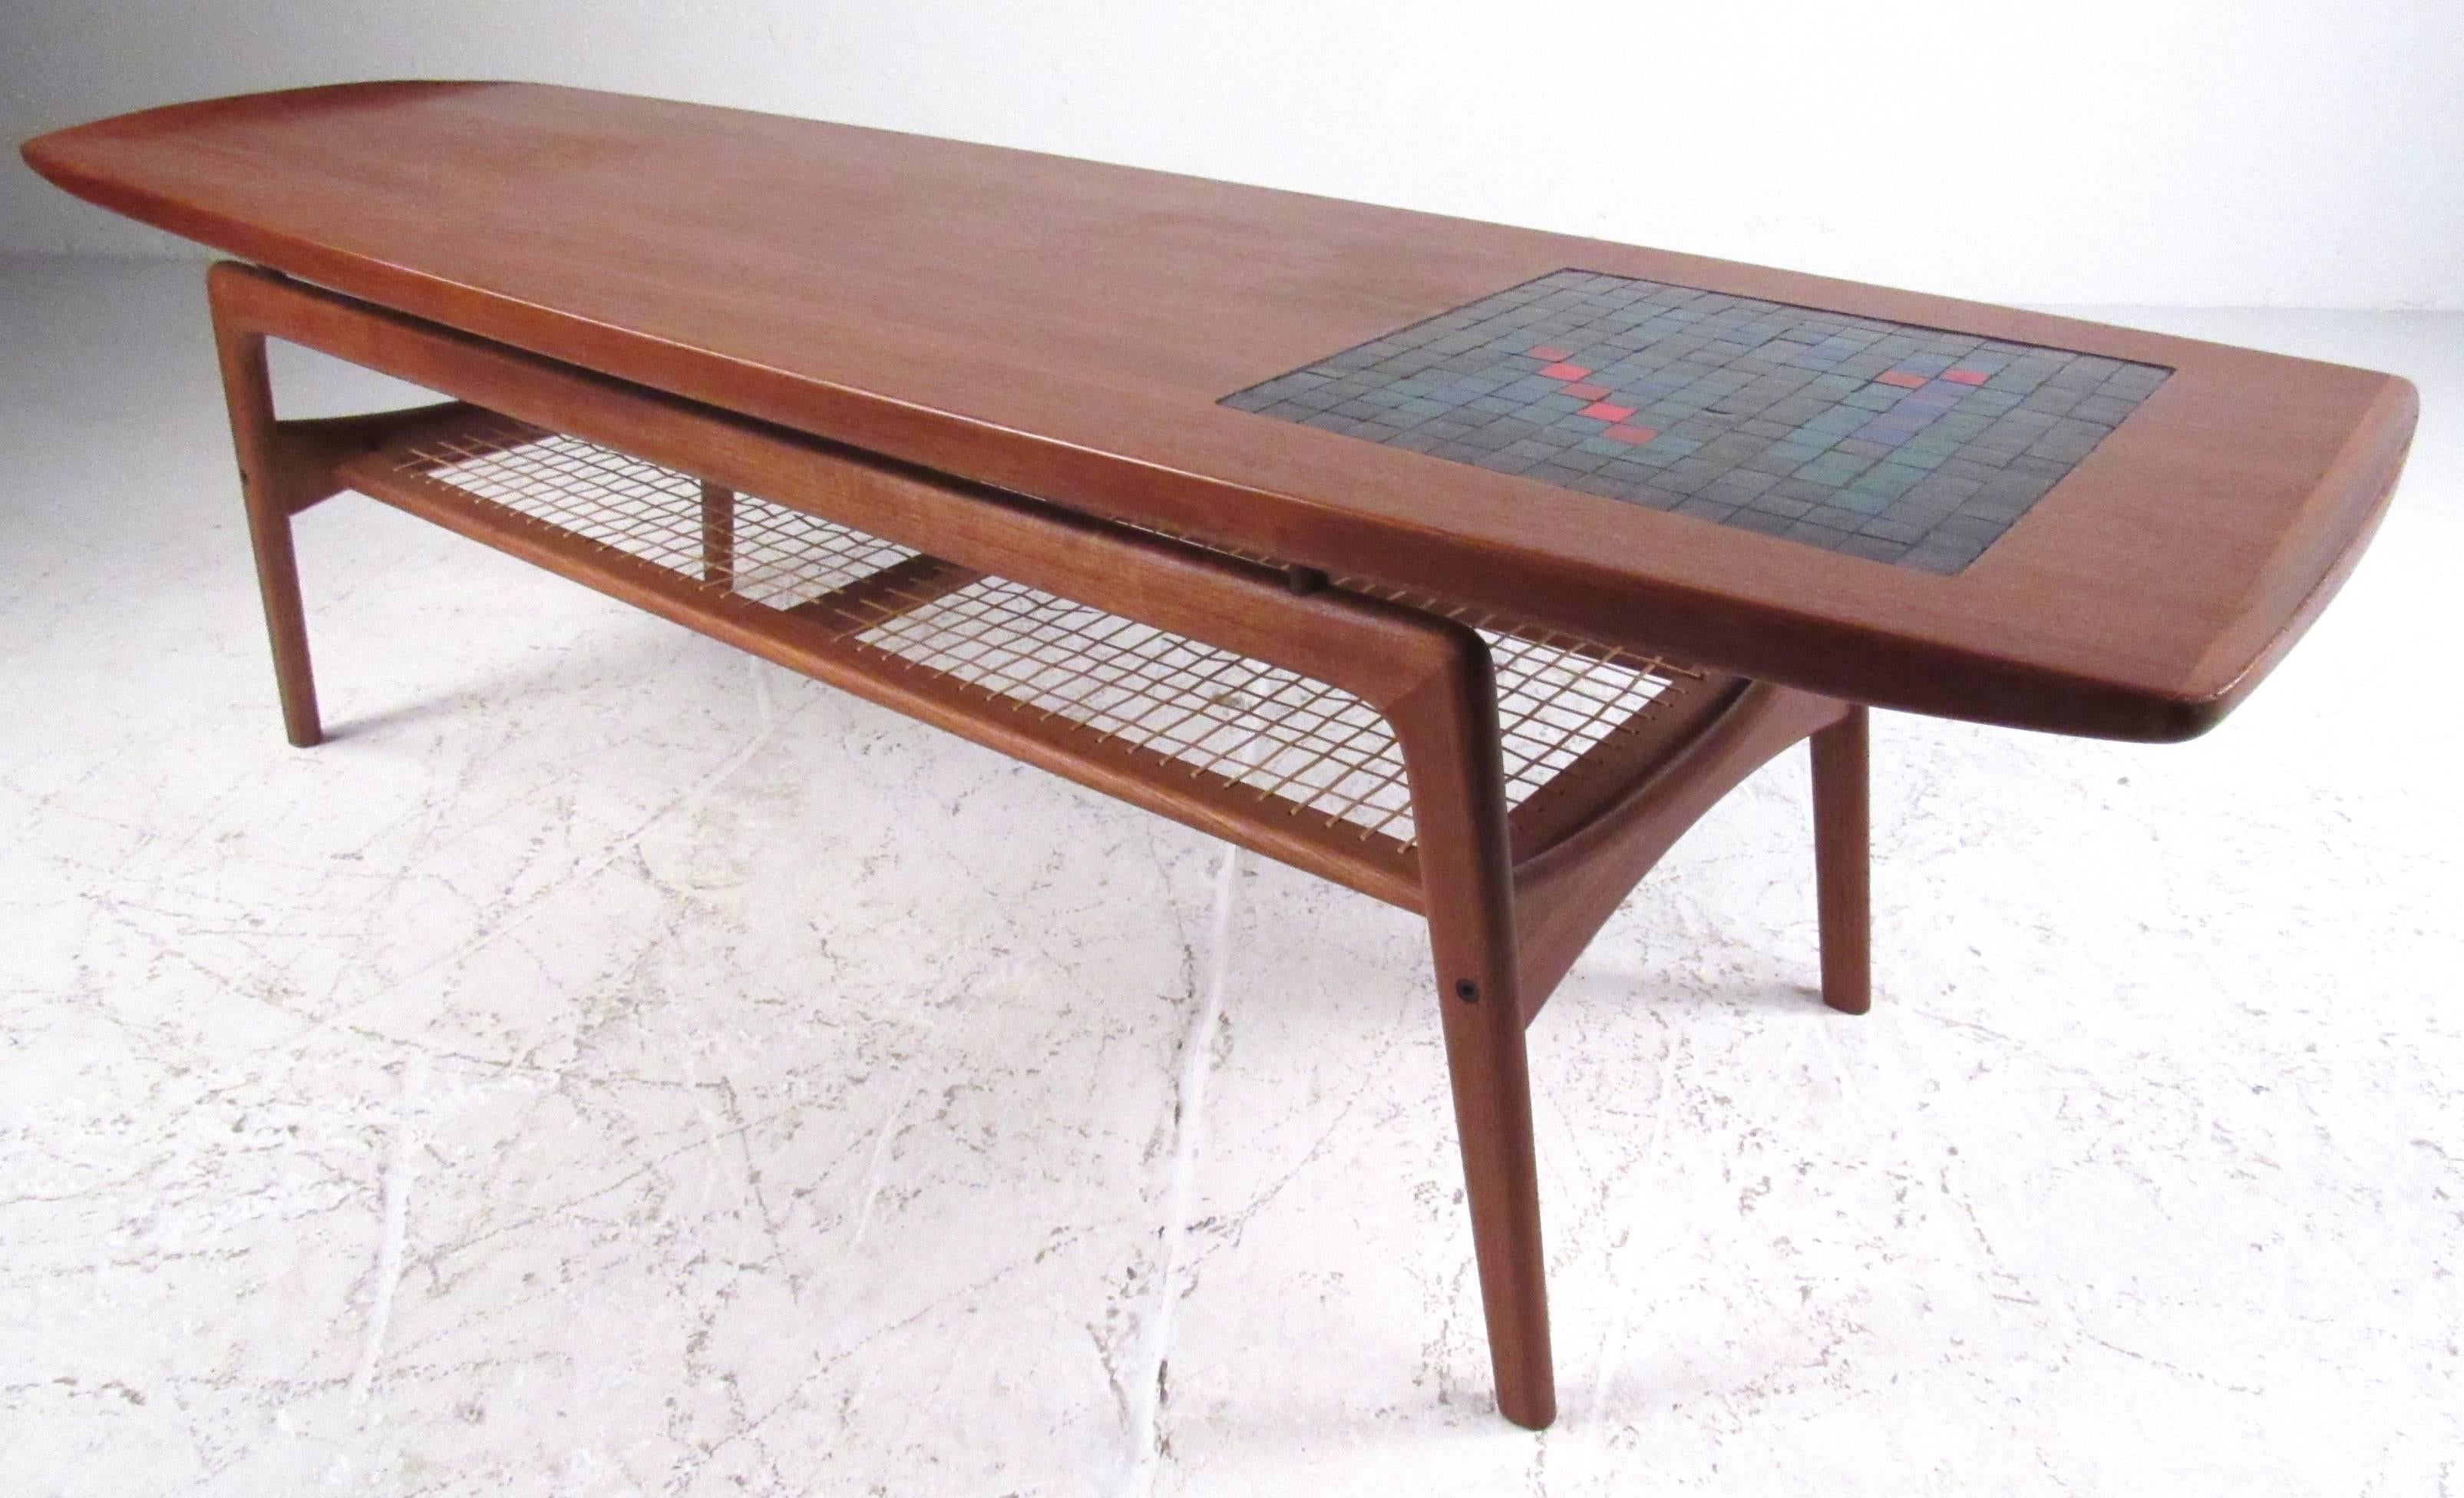 Elegant, sculptural, Danish modern coffee table designed by Arne Hovmand-Olsen and produced by Mogens Koch, circa 1960s. Colorful mosaic inlay on top with caned lower magazine shelf. Danish Furniture Makers Control label. Please confirm item